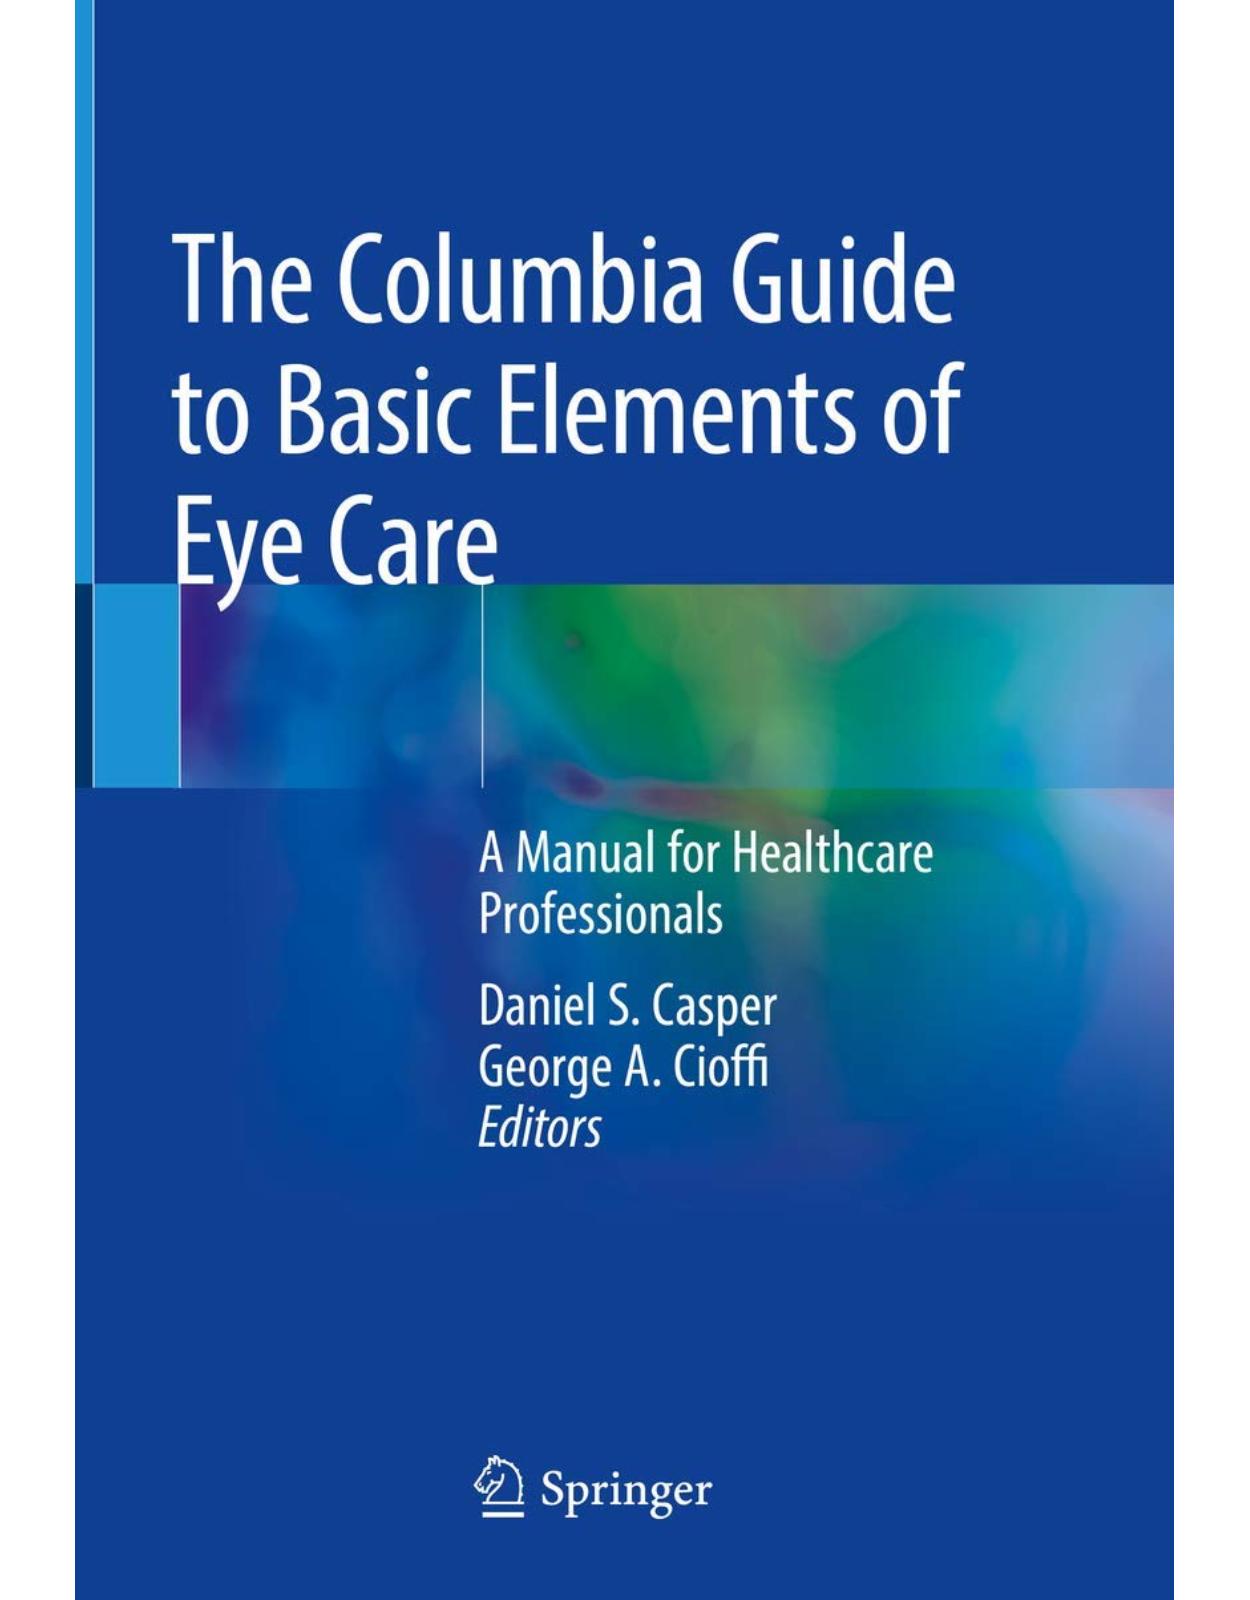 The Columbia Guide to Basic Elements of Eye Care: A Manual for Healthcare Professionals 